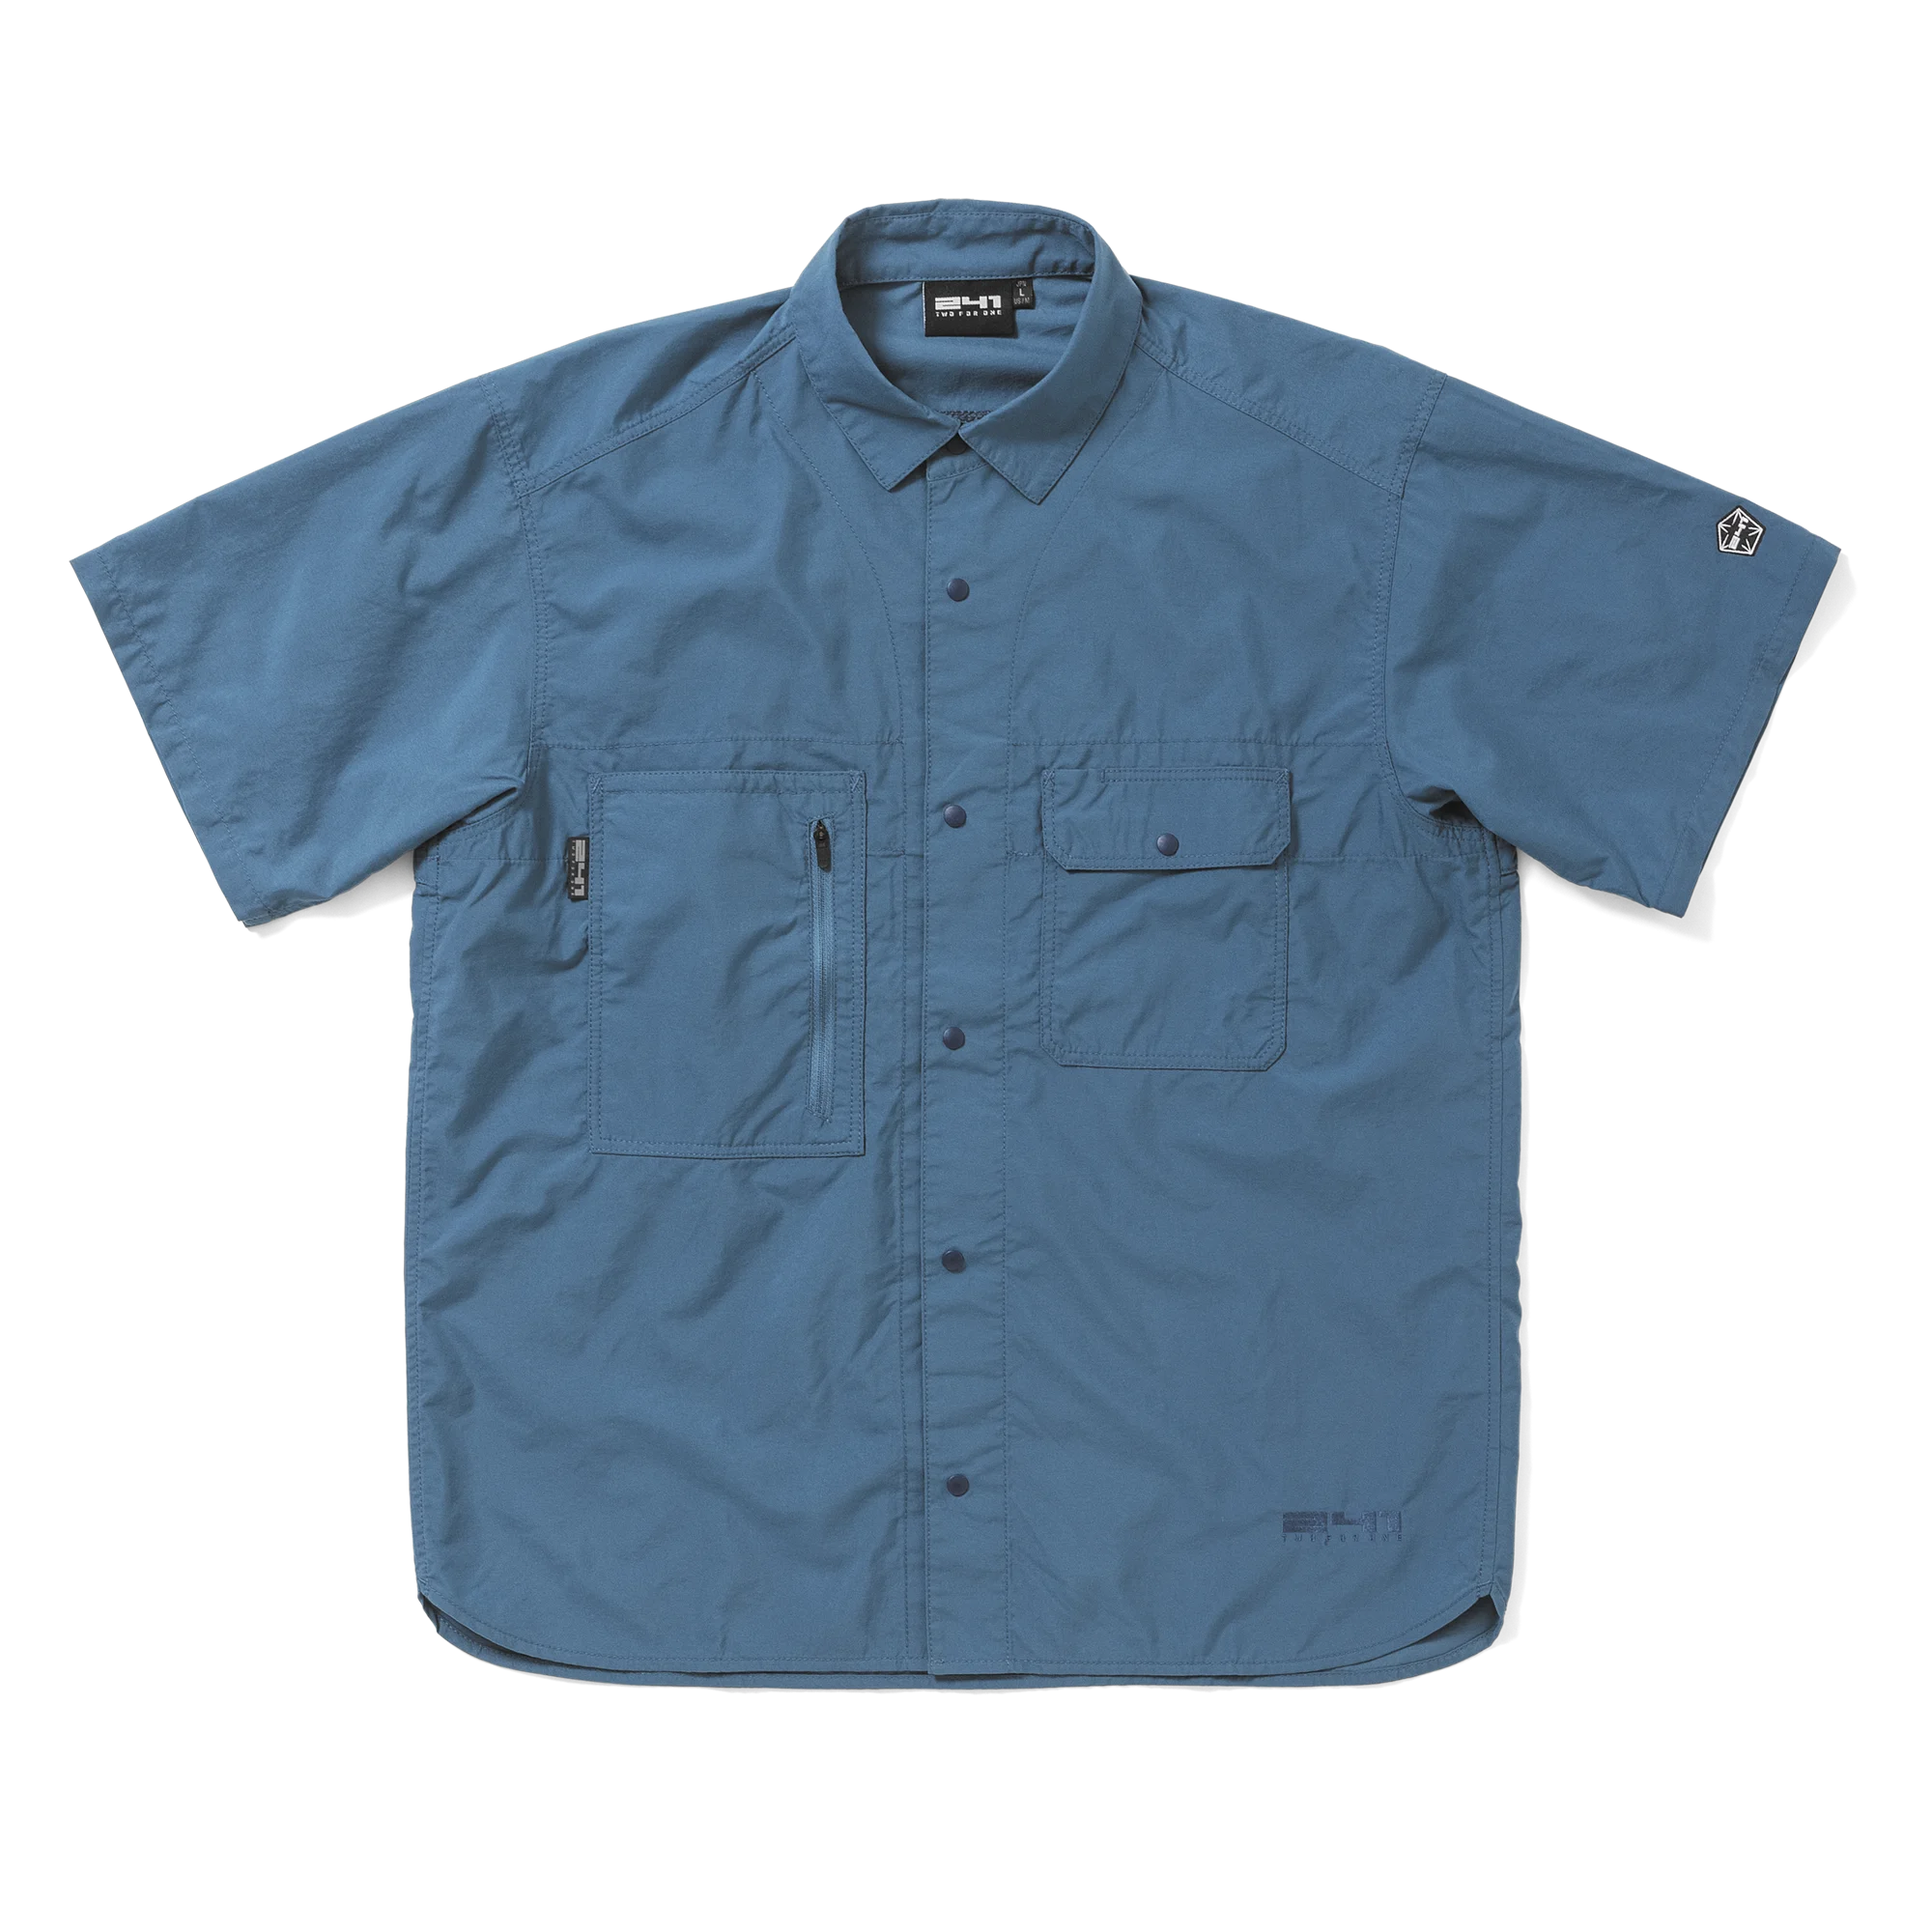 AREA241-DWR WORK SS SHIRTS